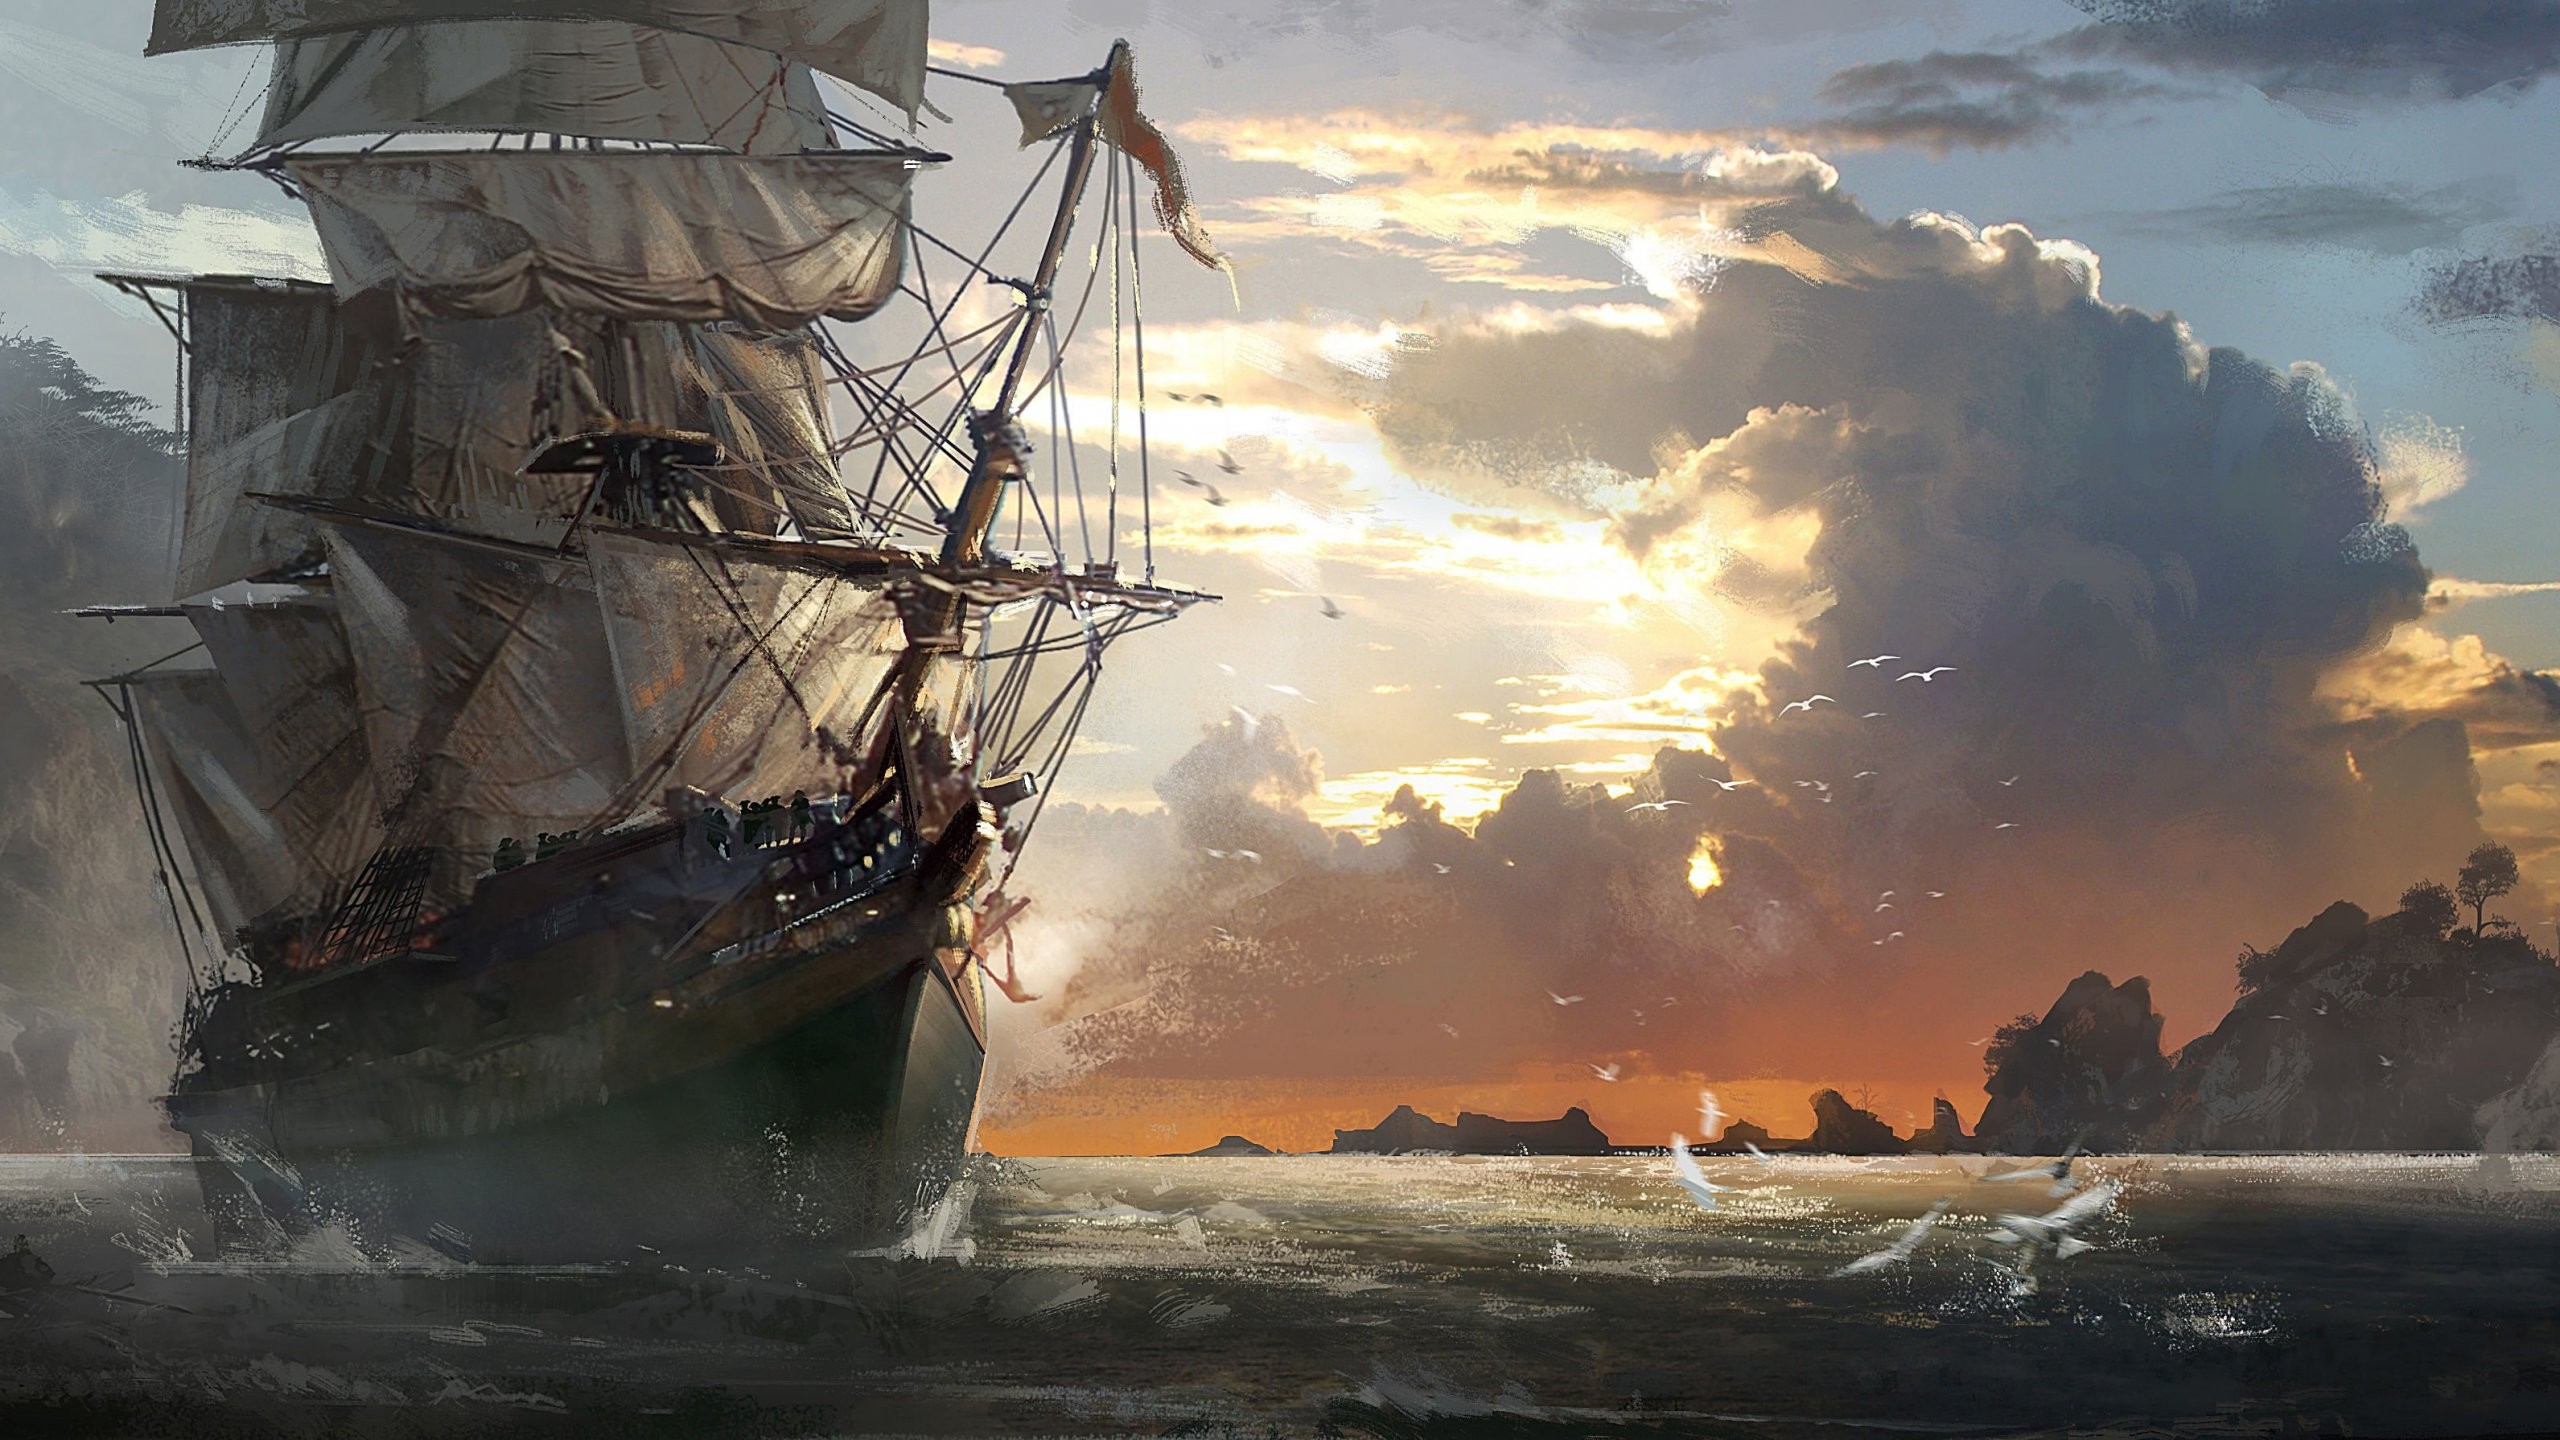 Pirate Ship Backgrounds HD Wallpapers Download Free Map Images Wallpaper [wallpaper376.blogspot.com]